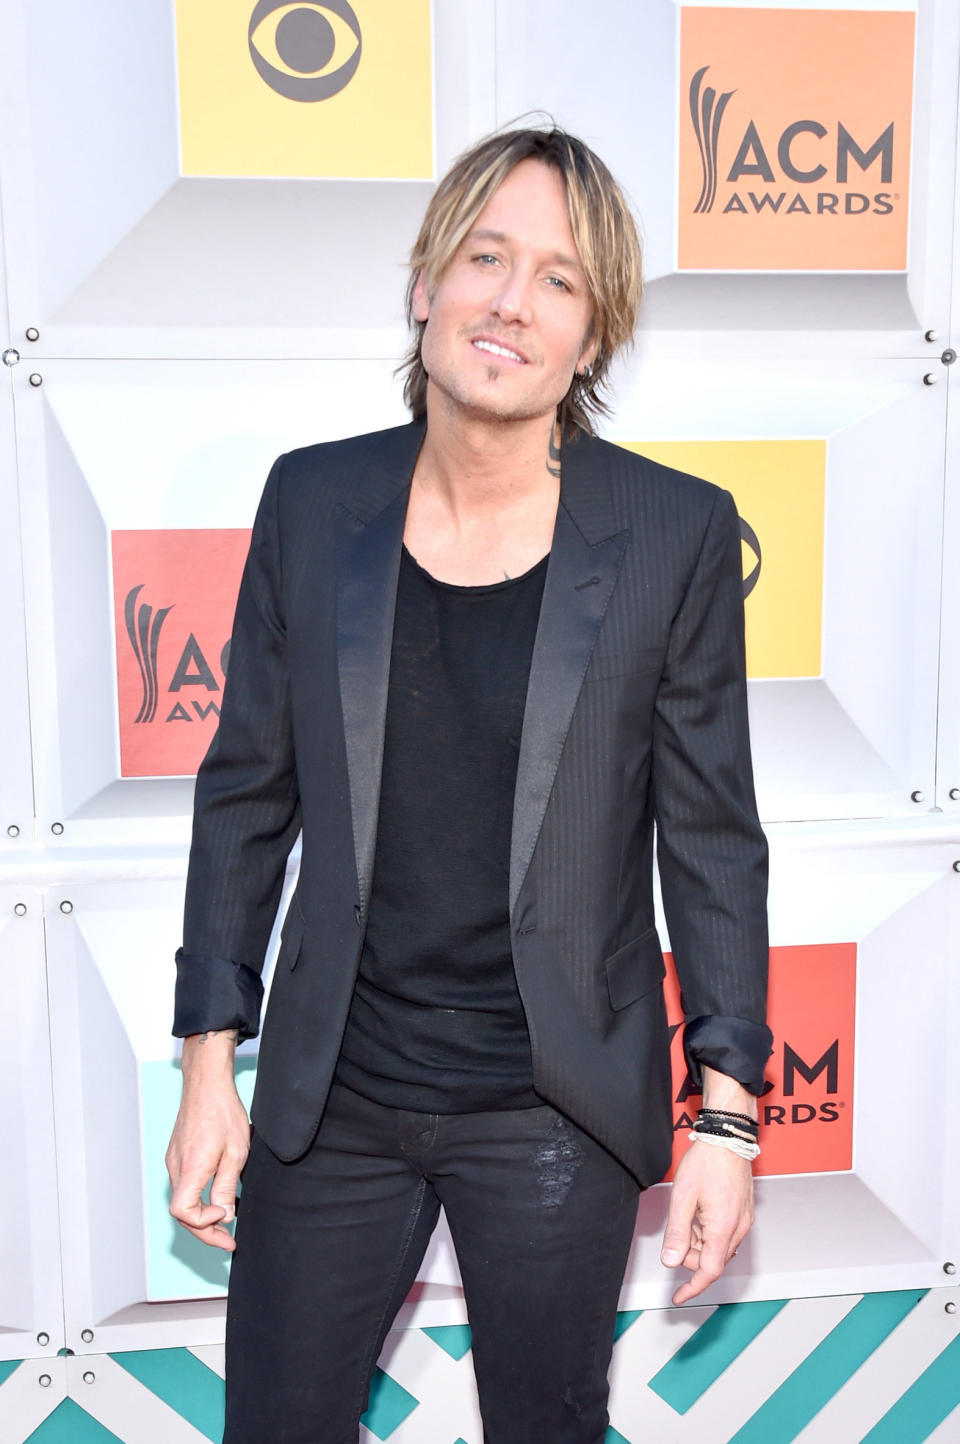 LAS VEGAS, NEVADA - APRIL 03:  Recording artist Keith Urban attends the 51st Academy of Country Music Awards at MGM Grand Garden Arena on April 3, 2016 in Las Vegas, Nevada.  (Photo by John Shearer/WireImage)